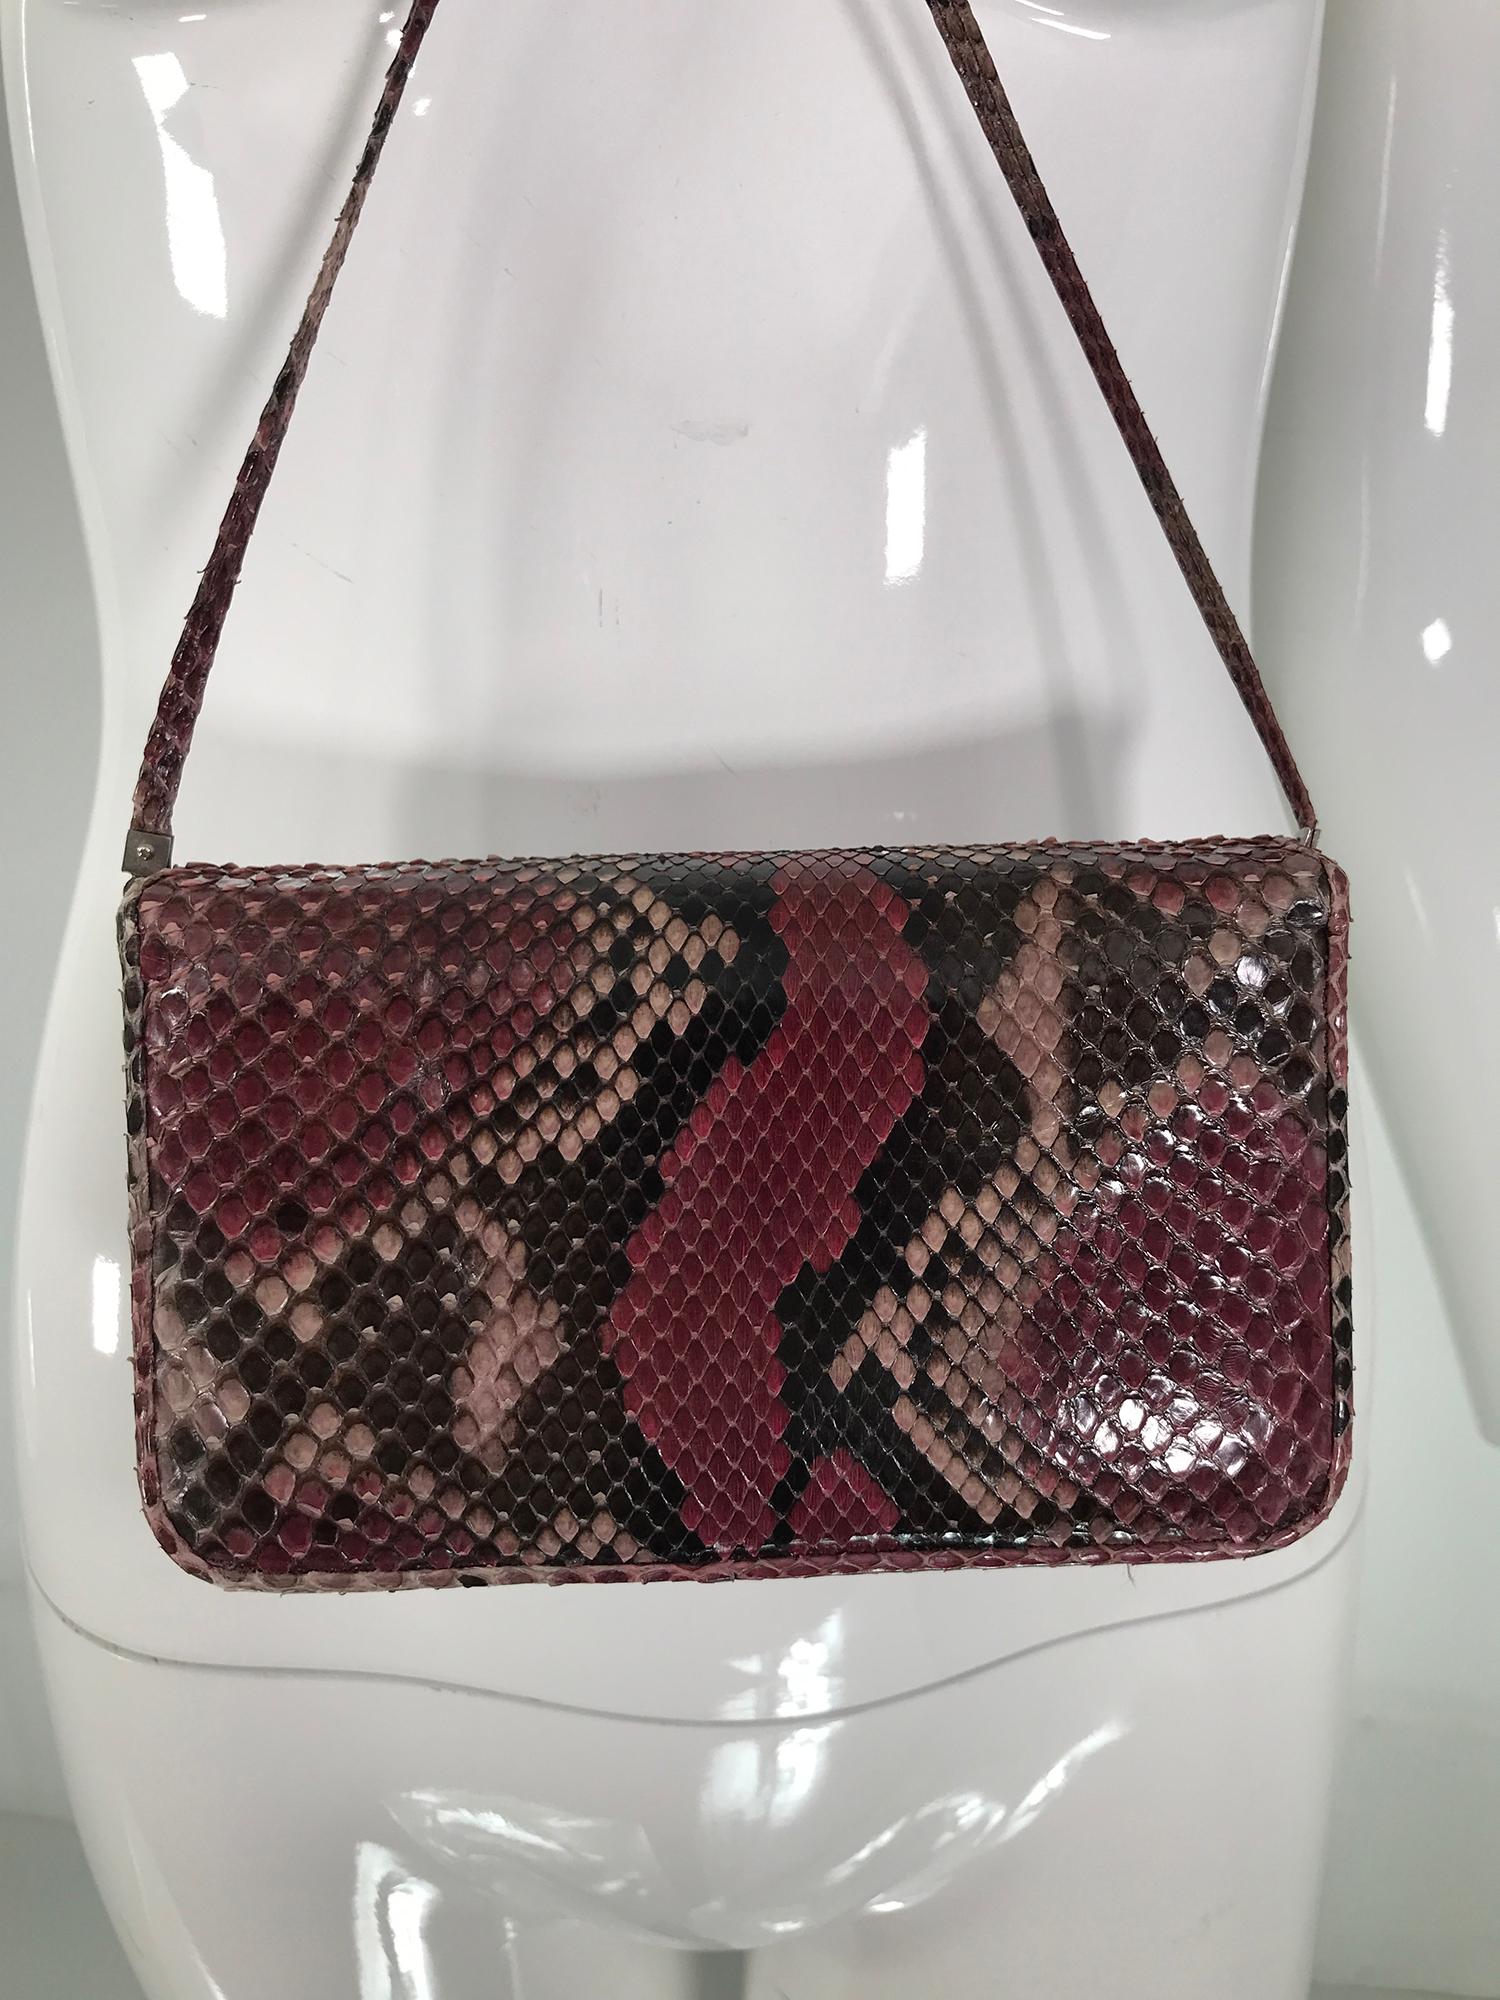 Judith Leiber Wine & Back Snakeskin Mini Clutch Shoulder Bag Silver Hardware In Good Condition For Sale In West Palm Beach, FL